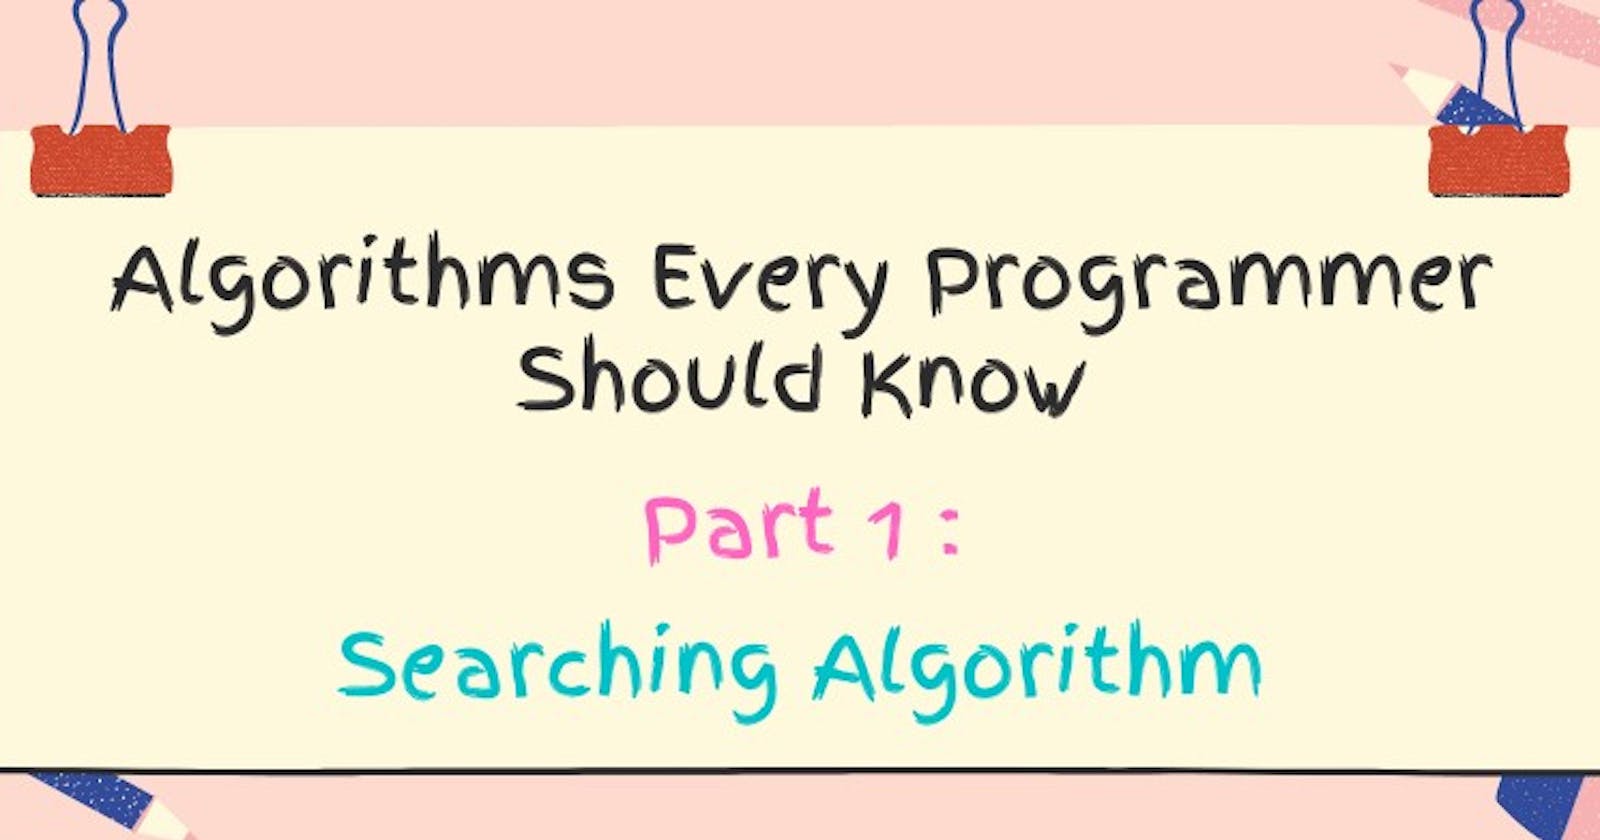 Algorithms Every Programmer Should Know